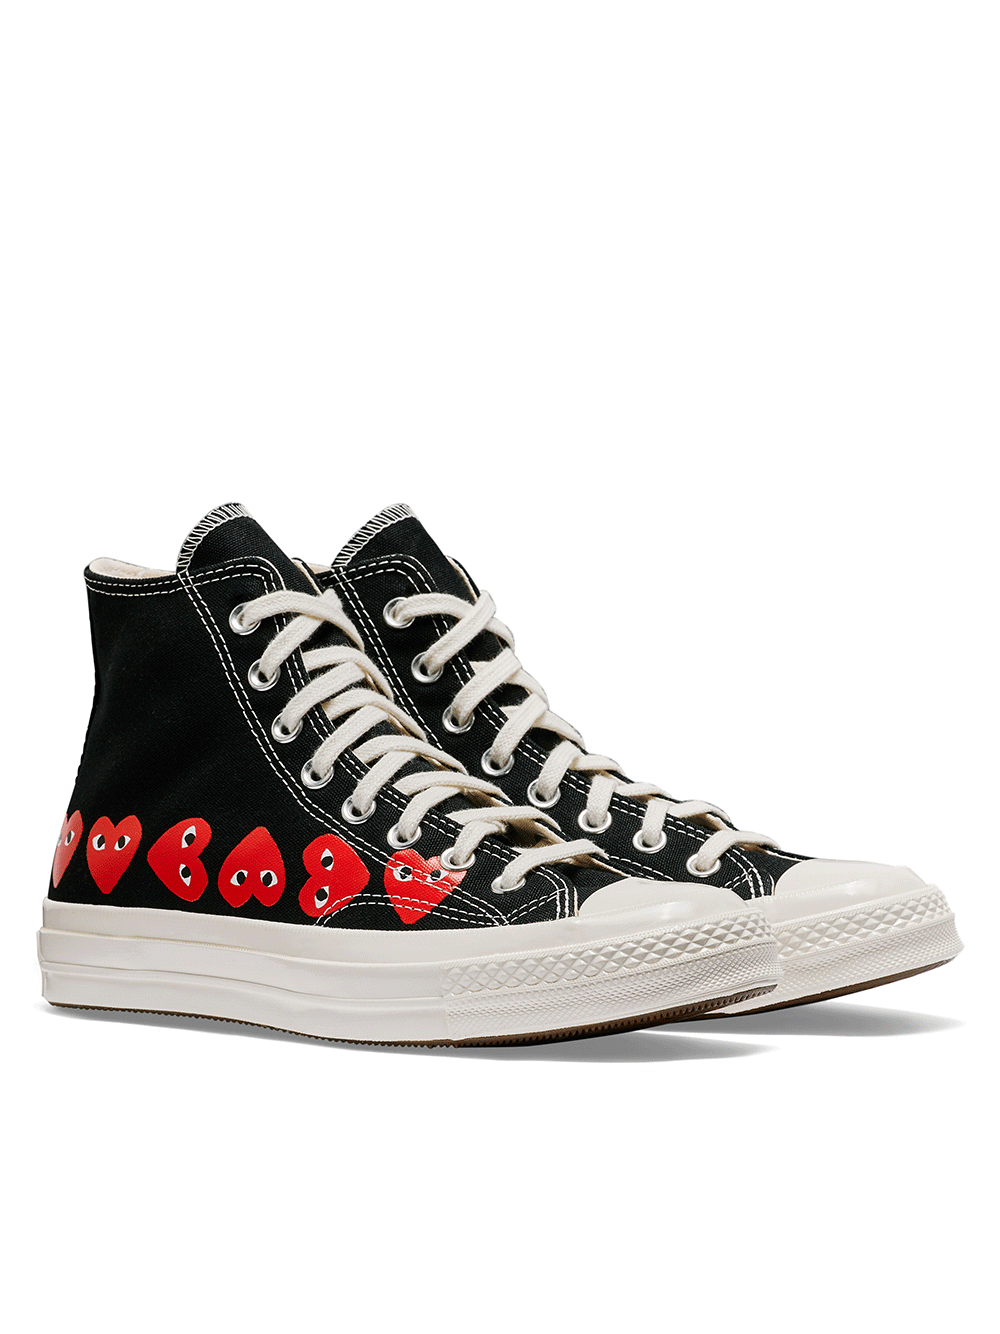 COMME-des-GARCONS-PLAY-CONVERSE-MULTI-HEART-Chuck-Taylor-All-Star-_70-High-Sneakers-3